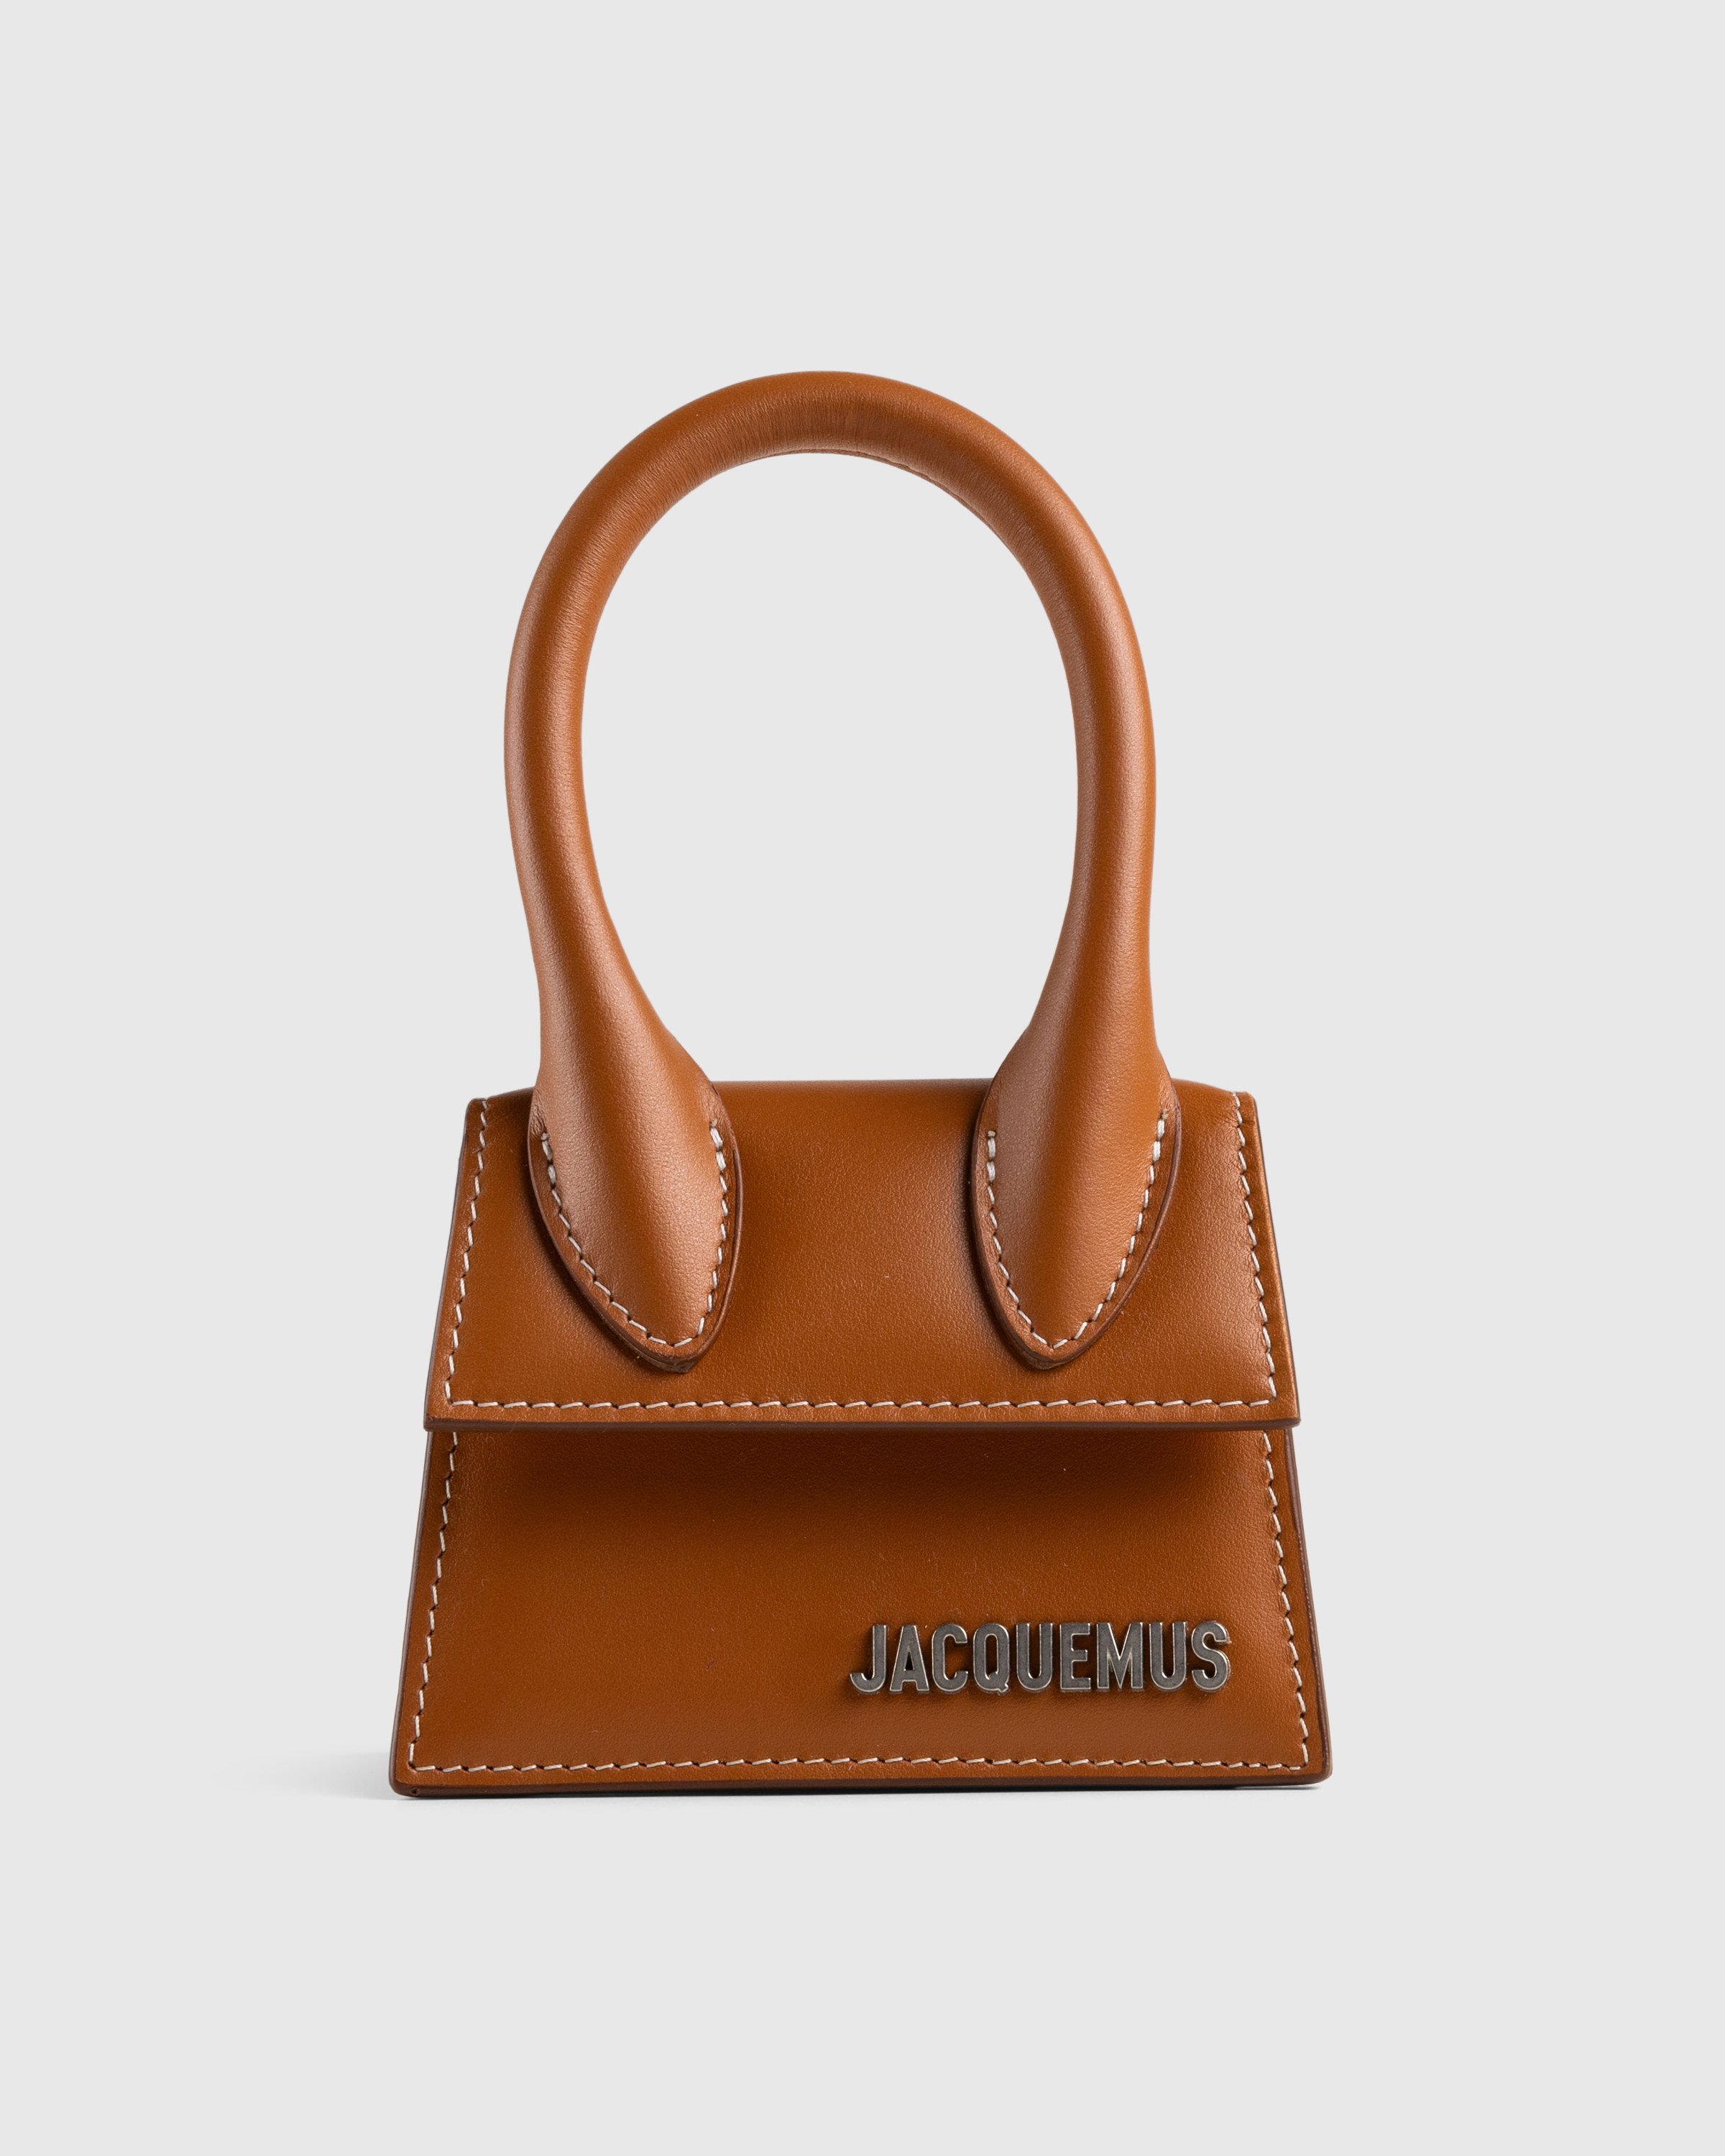 JACQUEMUS - LE CHIQUITO HOMME - Accessories - Brown - Image 1